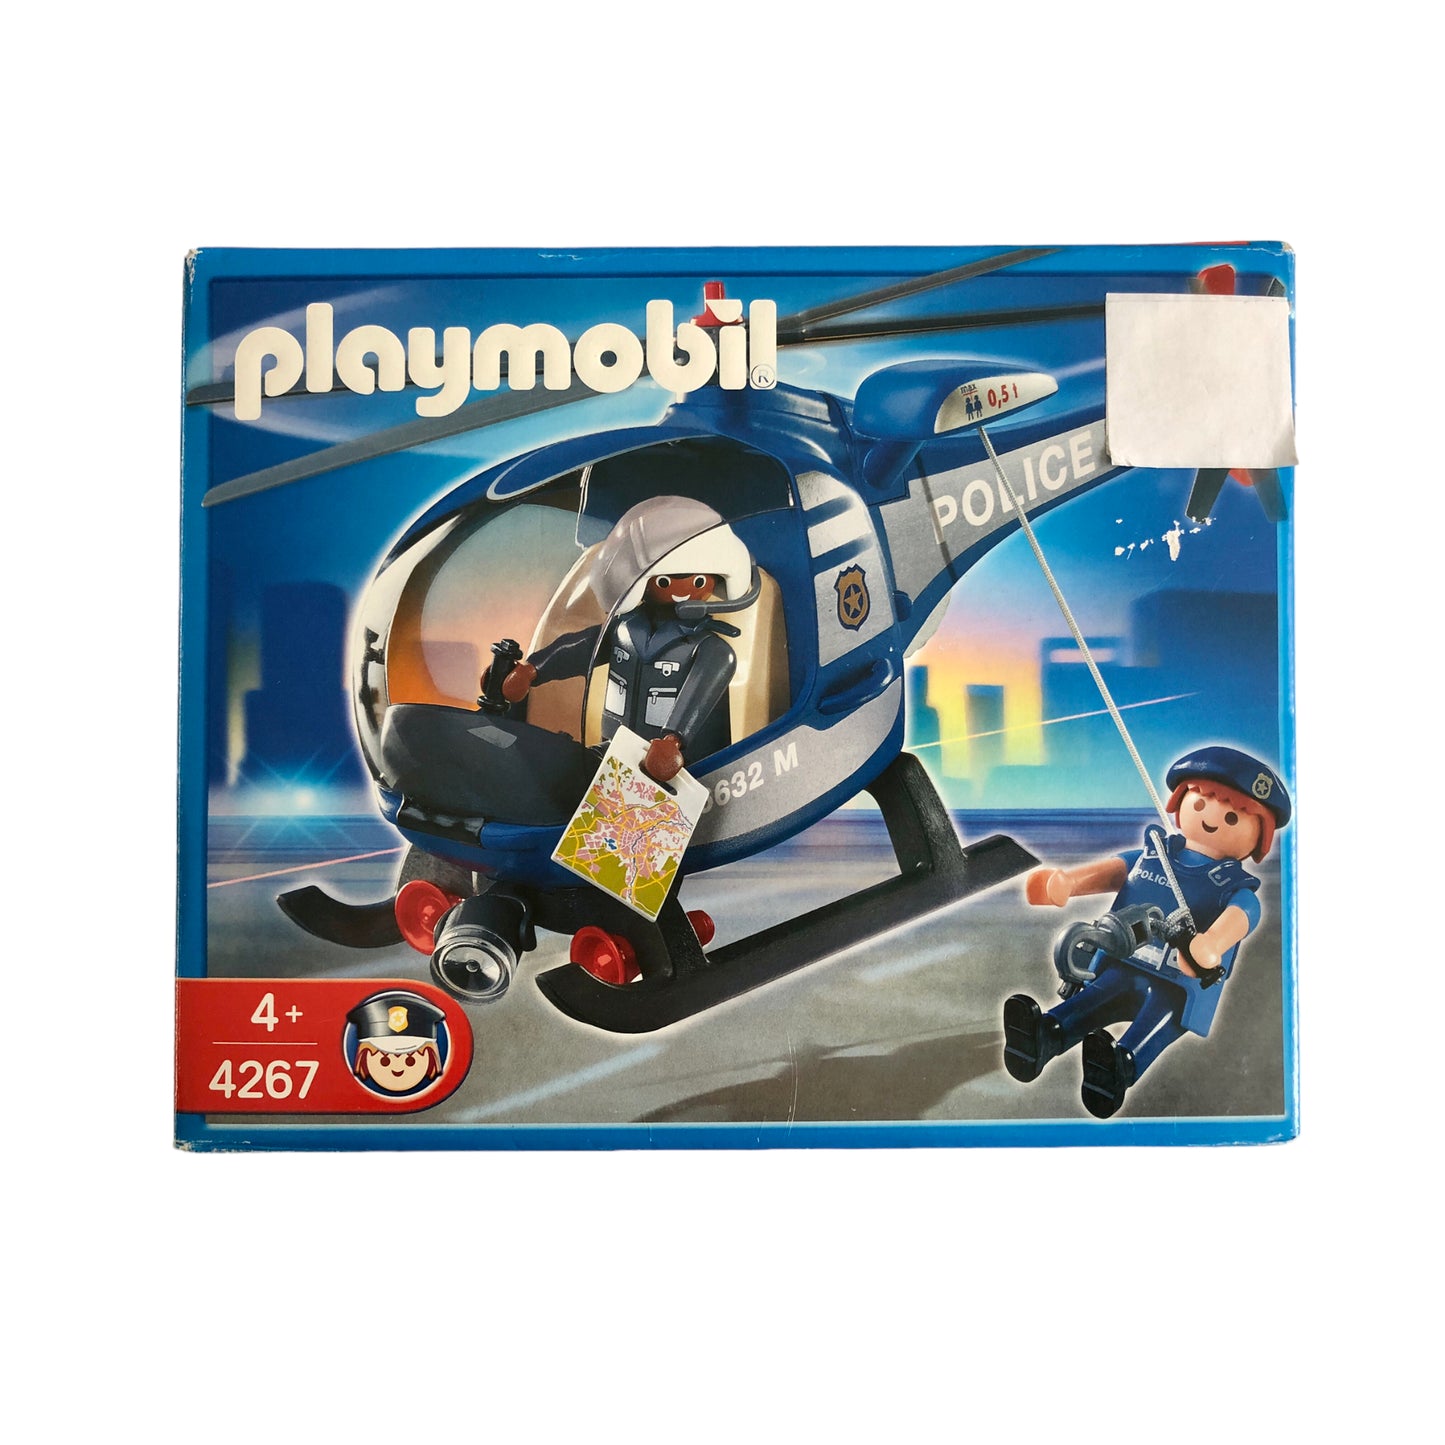 Playmobil - Helicopter with two figures